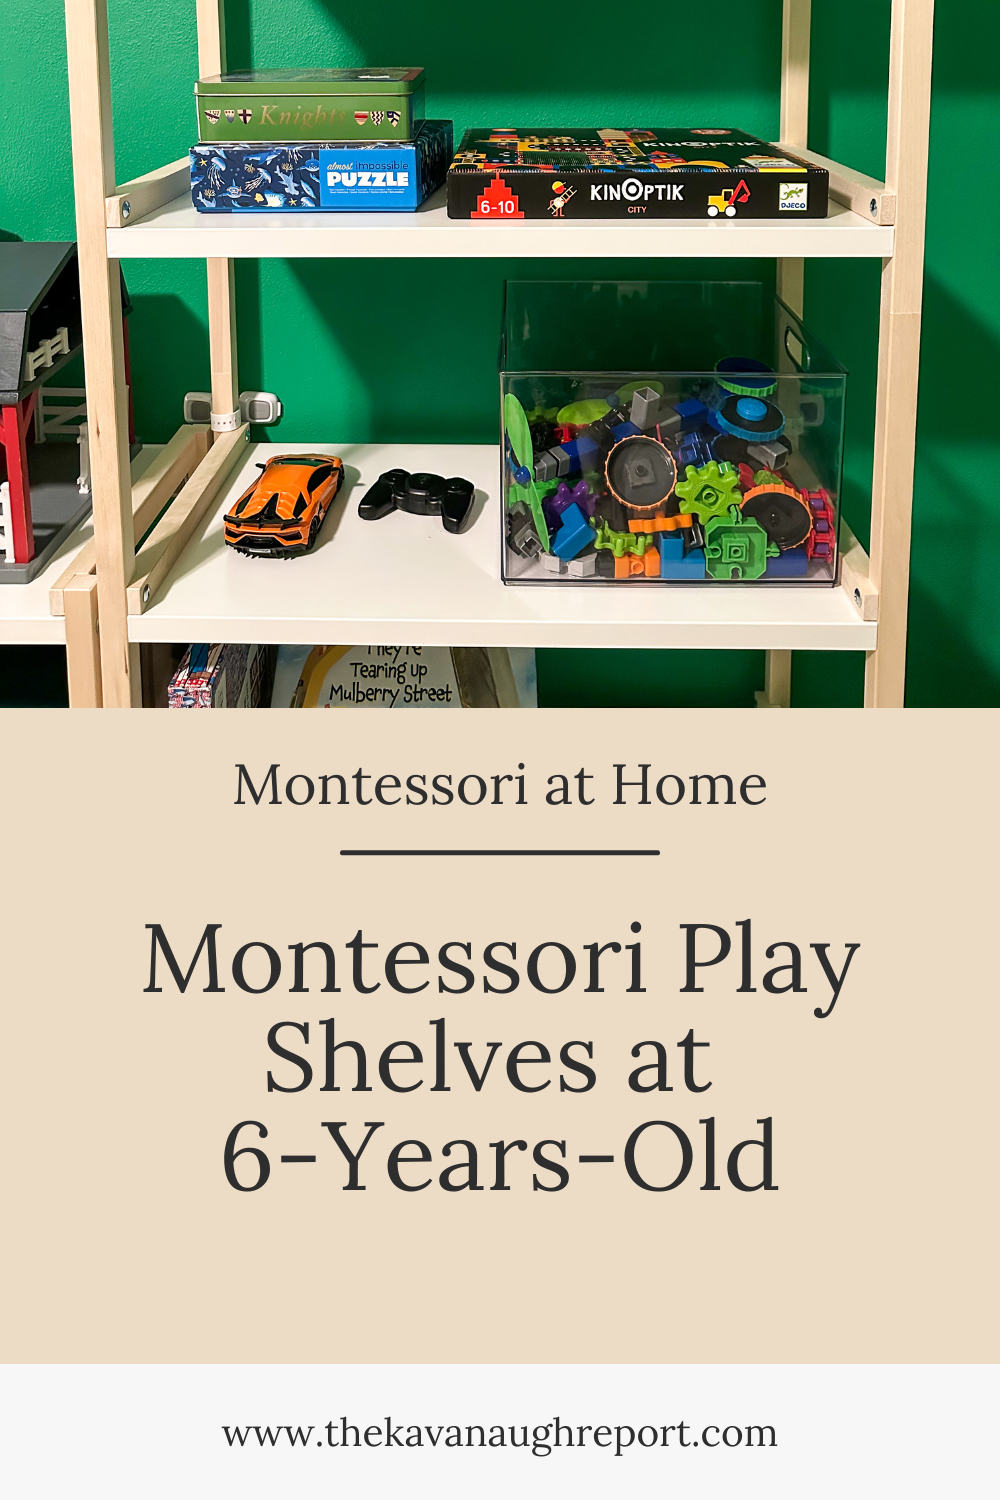 Some play shelf and toy ideas for 6-years-old from our Montessori home. Montessori play shelves for a second plane of development 6-year-old boy